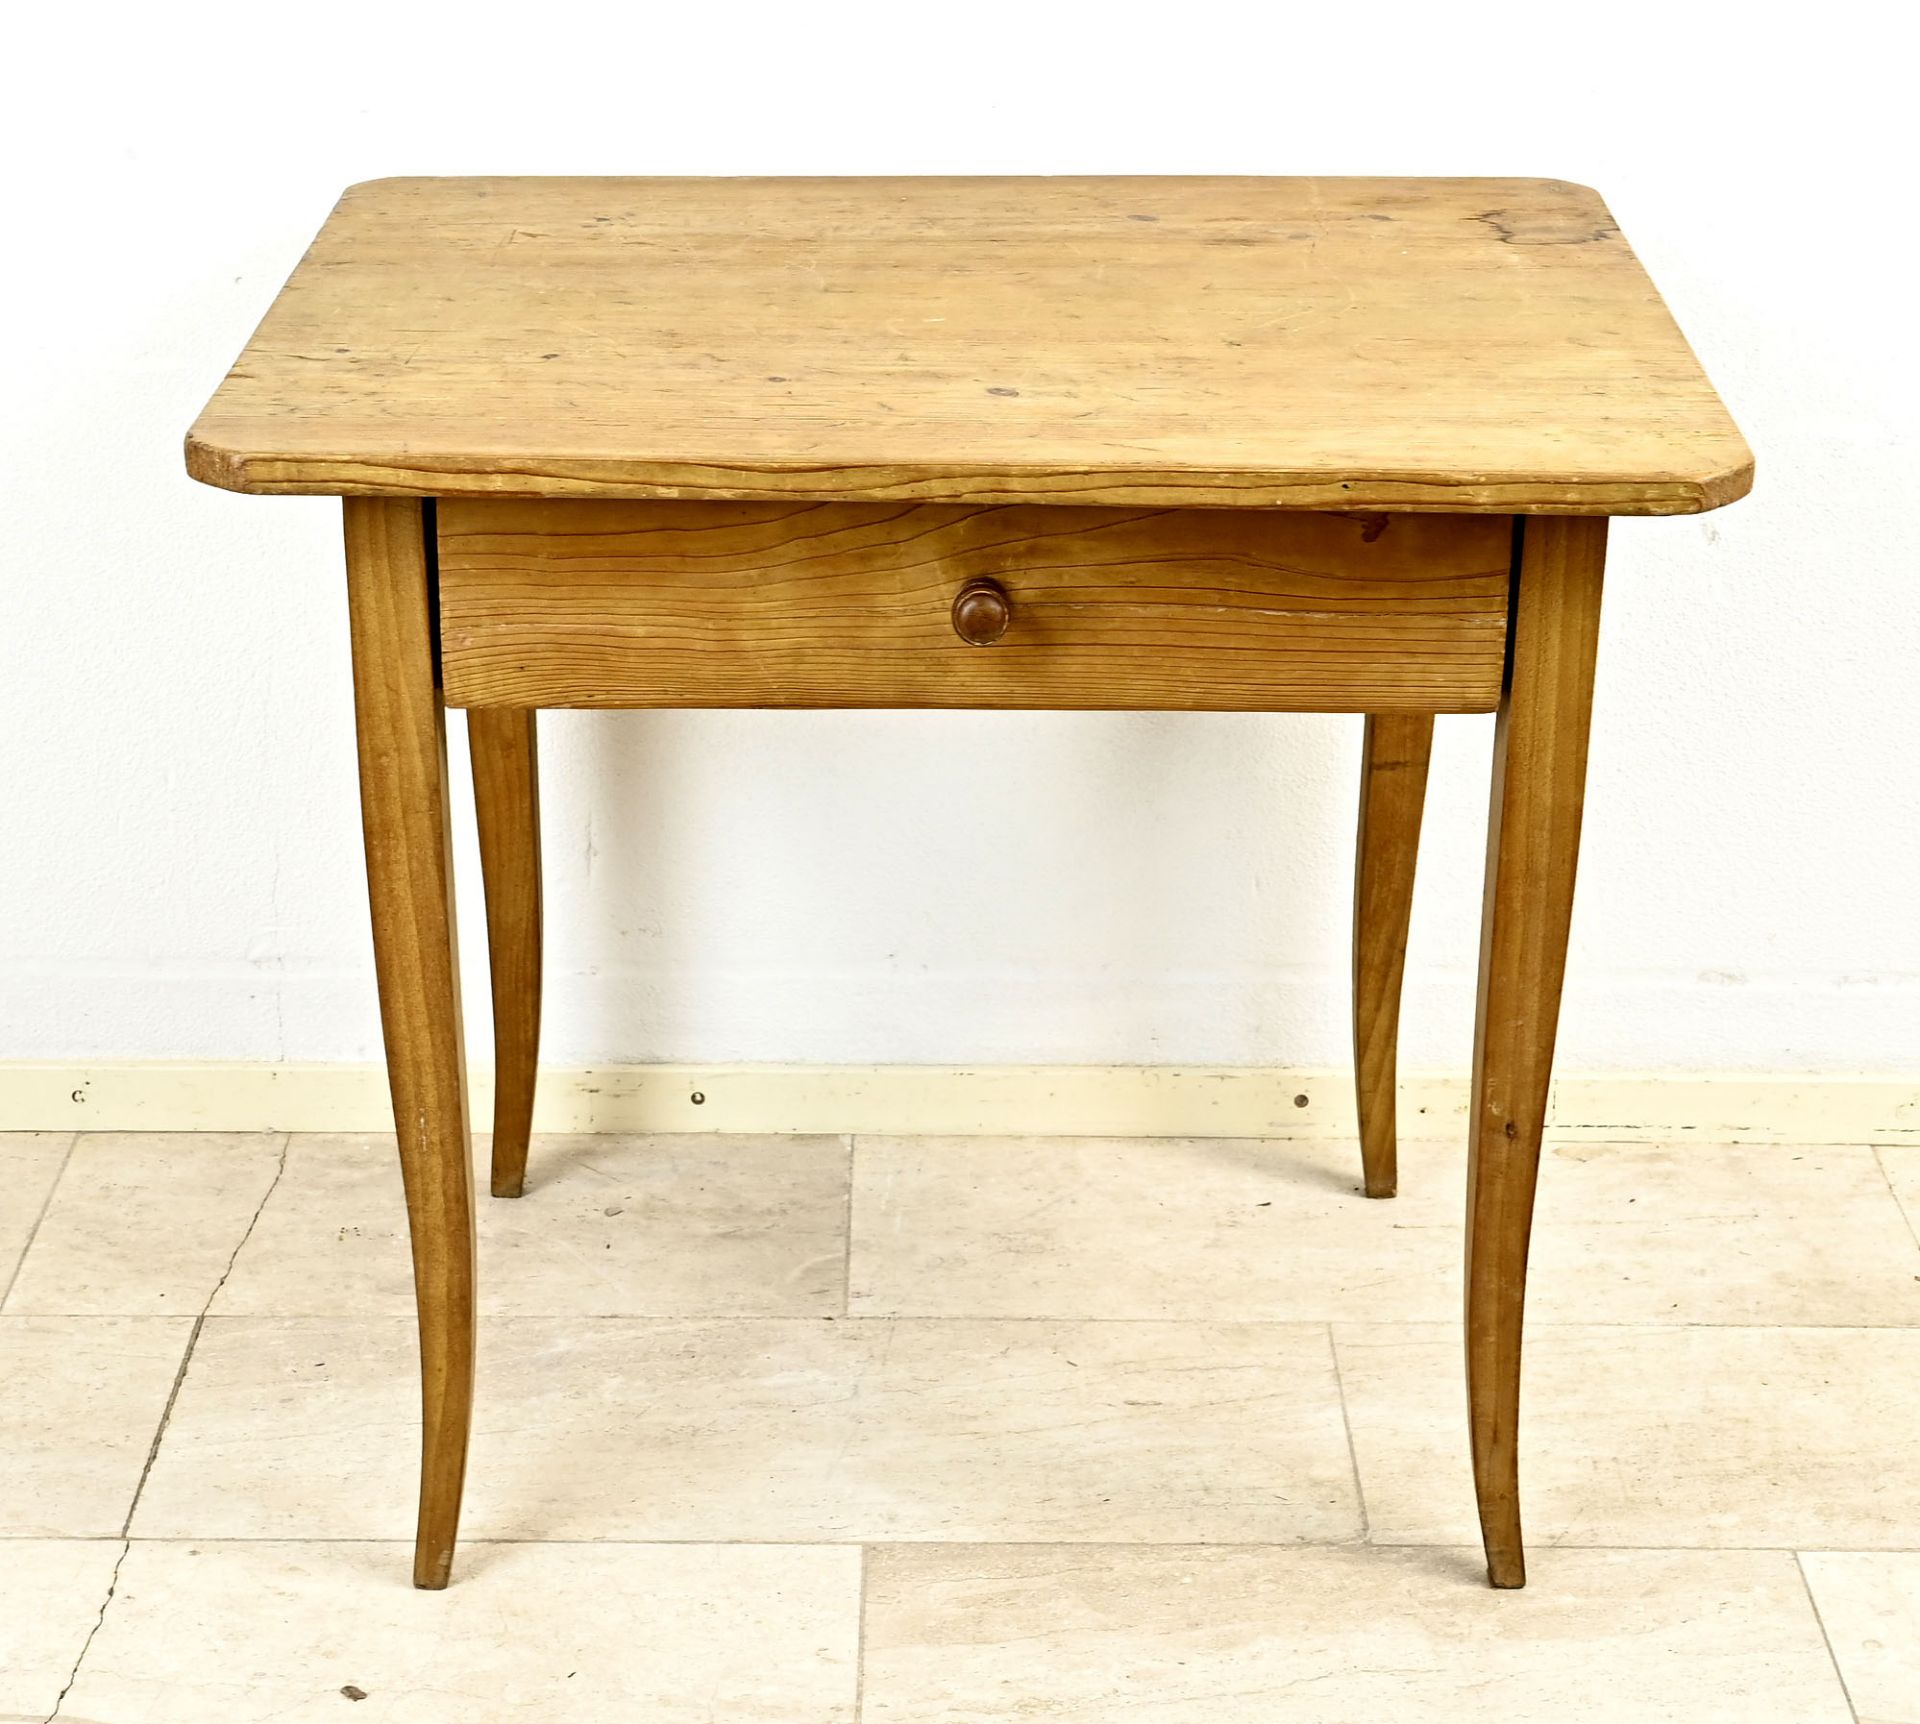 Biedermeier table from around 1820, softwood, frame with drawer, 75 x 119 x 88 cm - The furniture